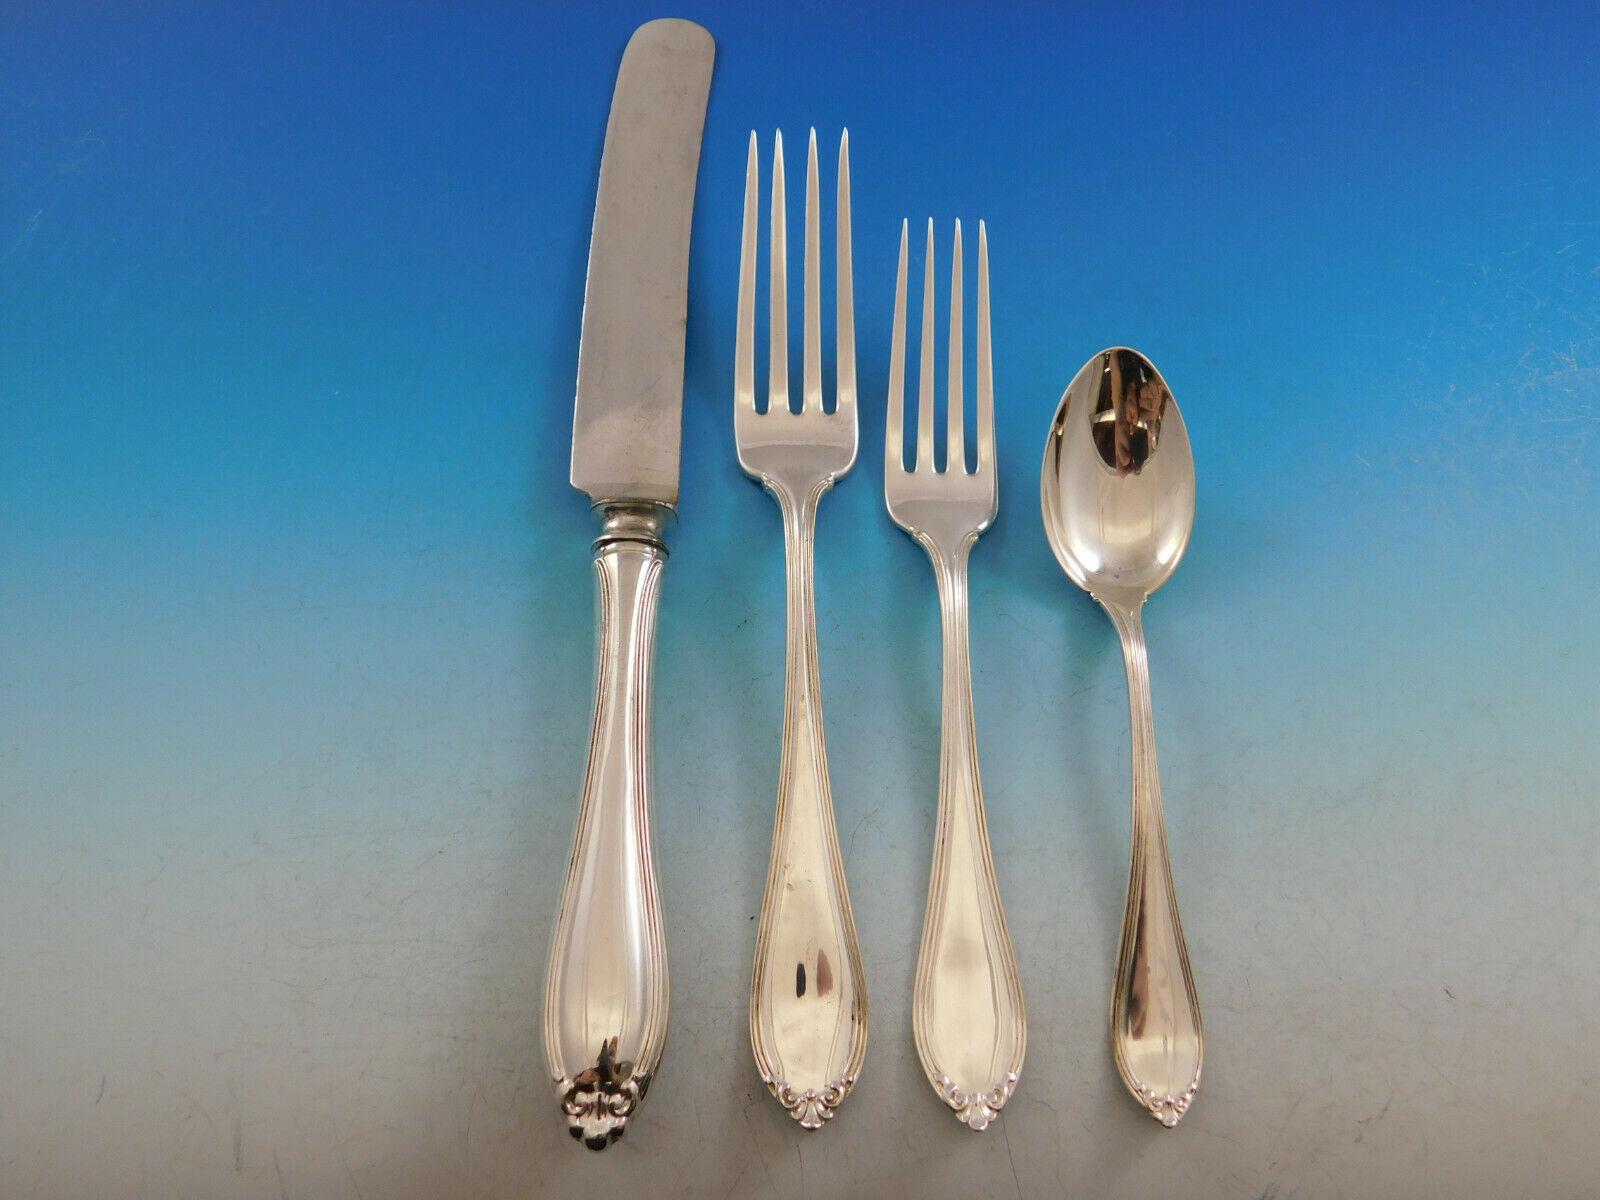 Monumental dinner and luncheon size set in the scarce 1907 pattern Evangeline by Alvin, 102 pieces. This set includes:

12 dinner knives, 9 3/4